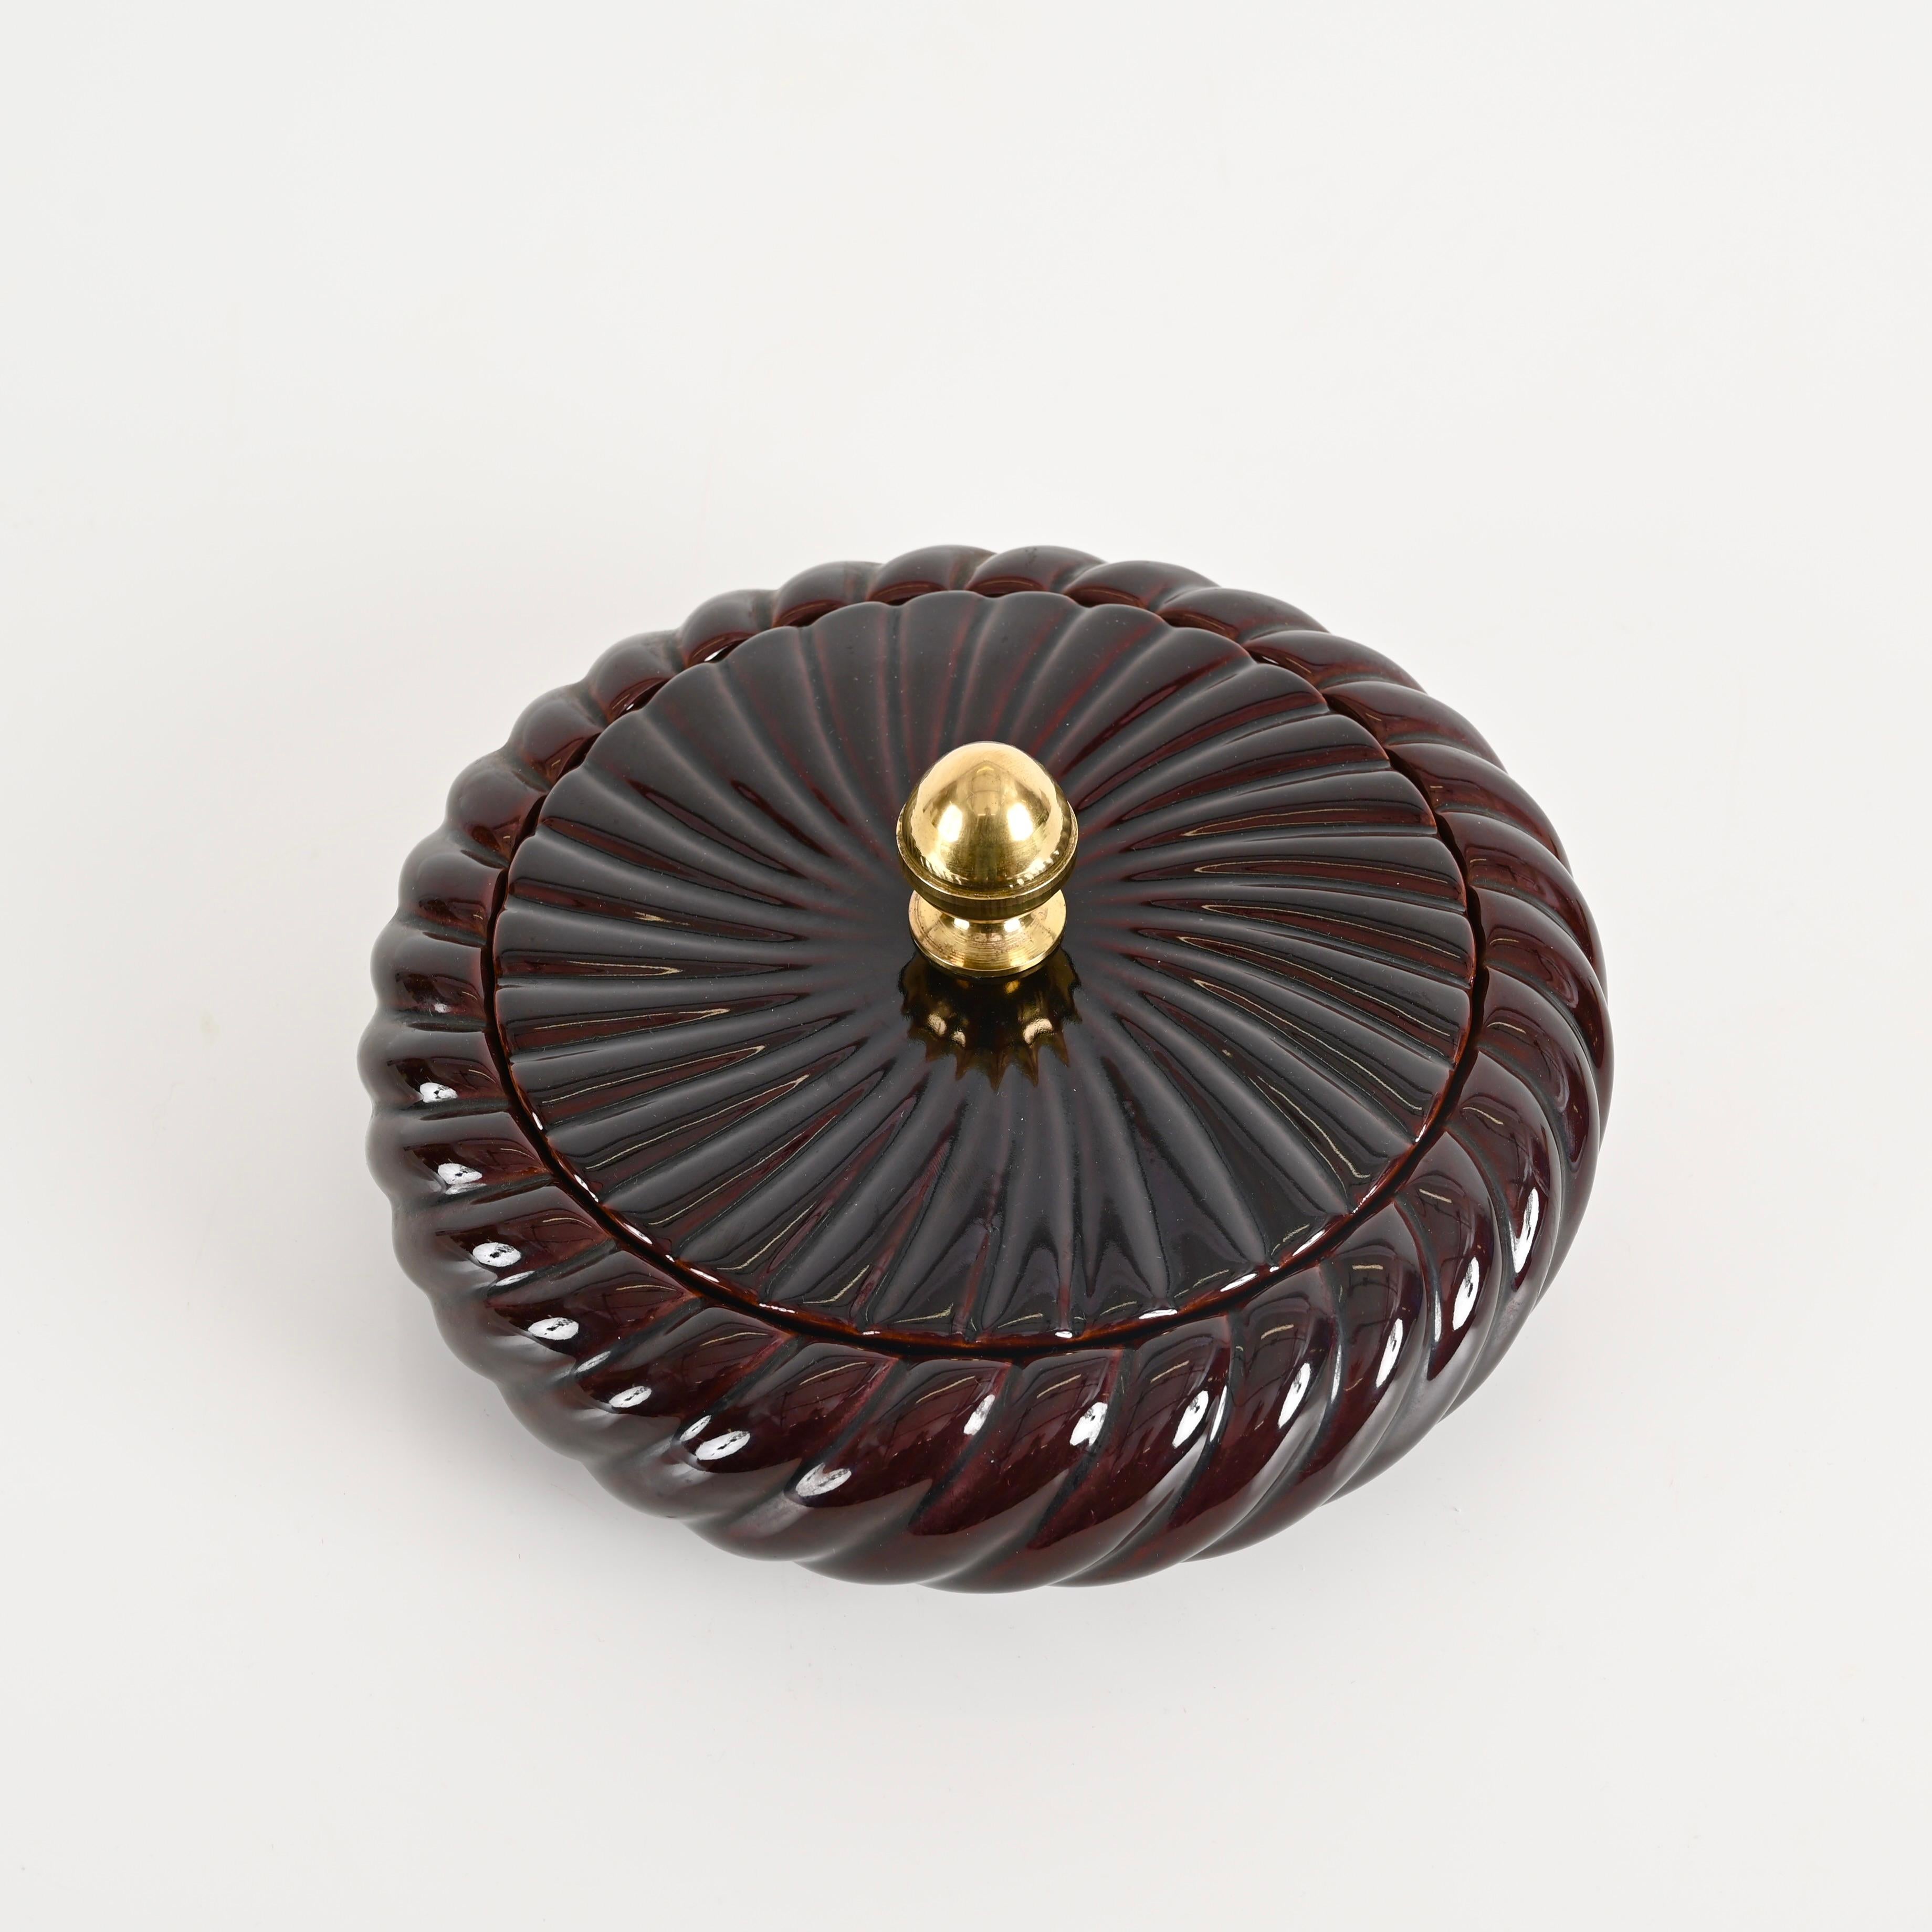 Tommaso Barbi Brown Ceramic and Brass Decorative Box or Centerpiece, Italy 1970s For Sale 1